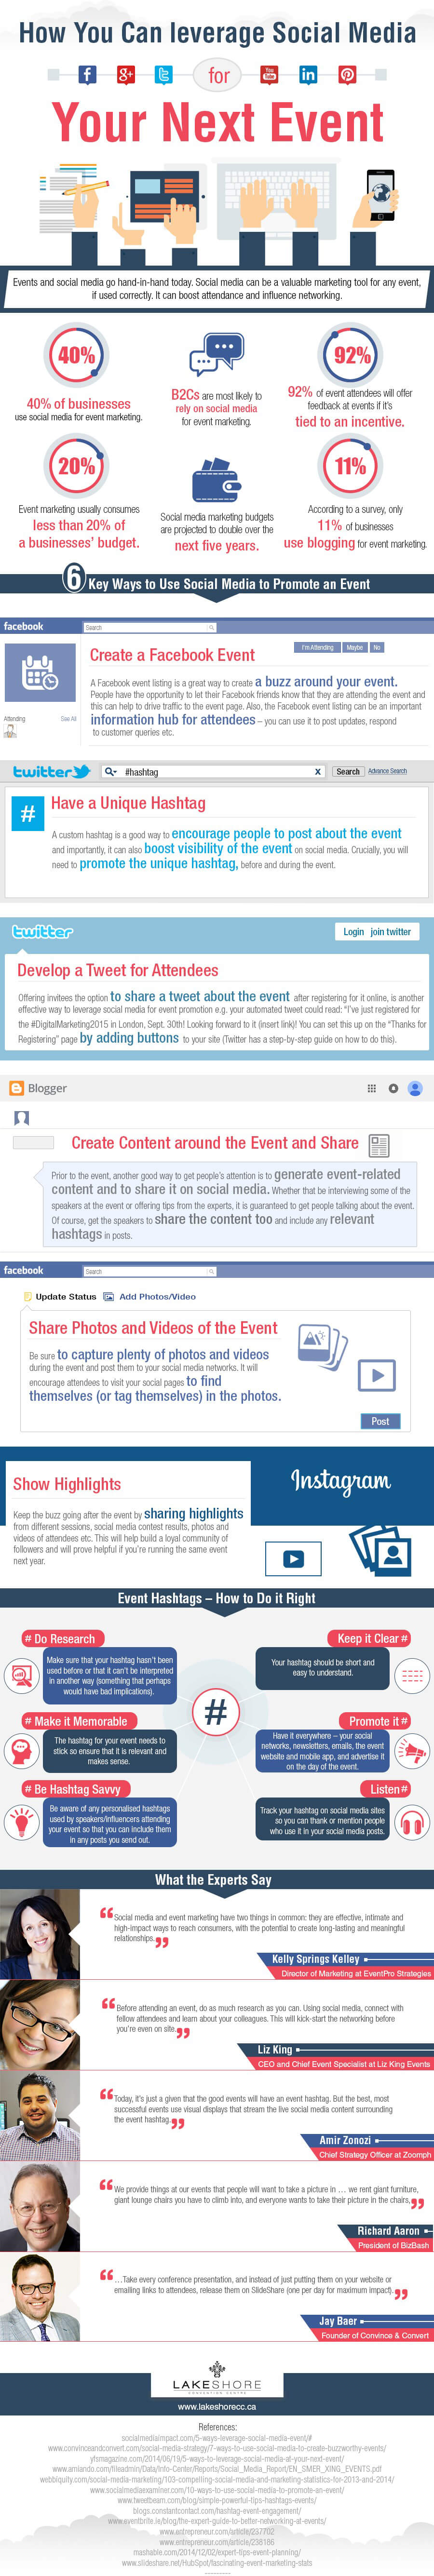 how-to-leverage-social-media-for-your-next-event-infographic